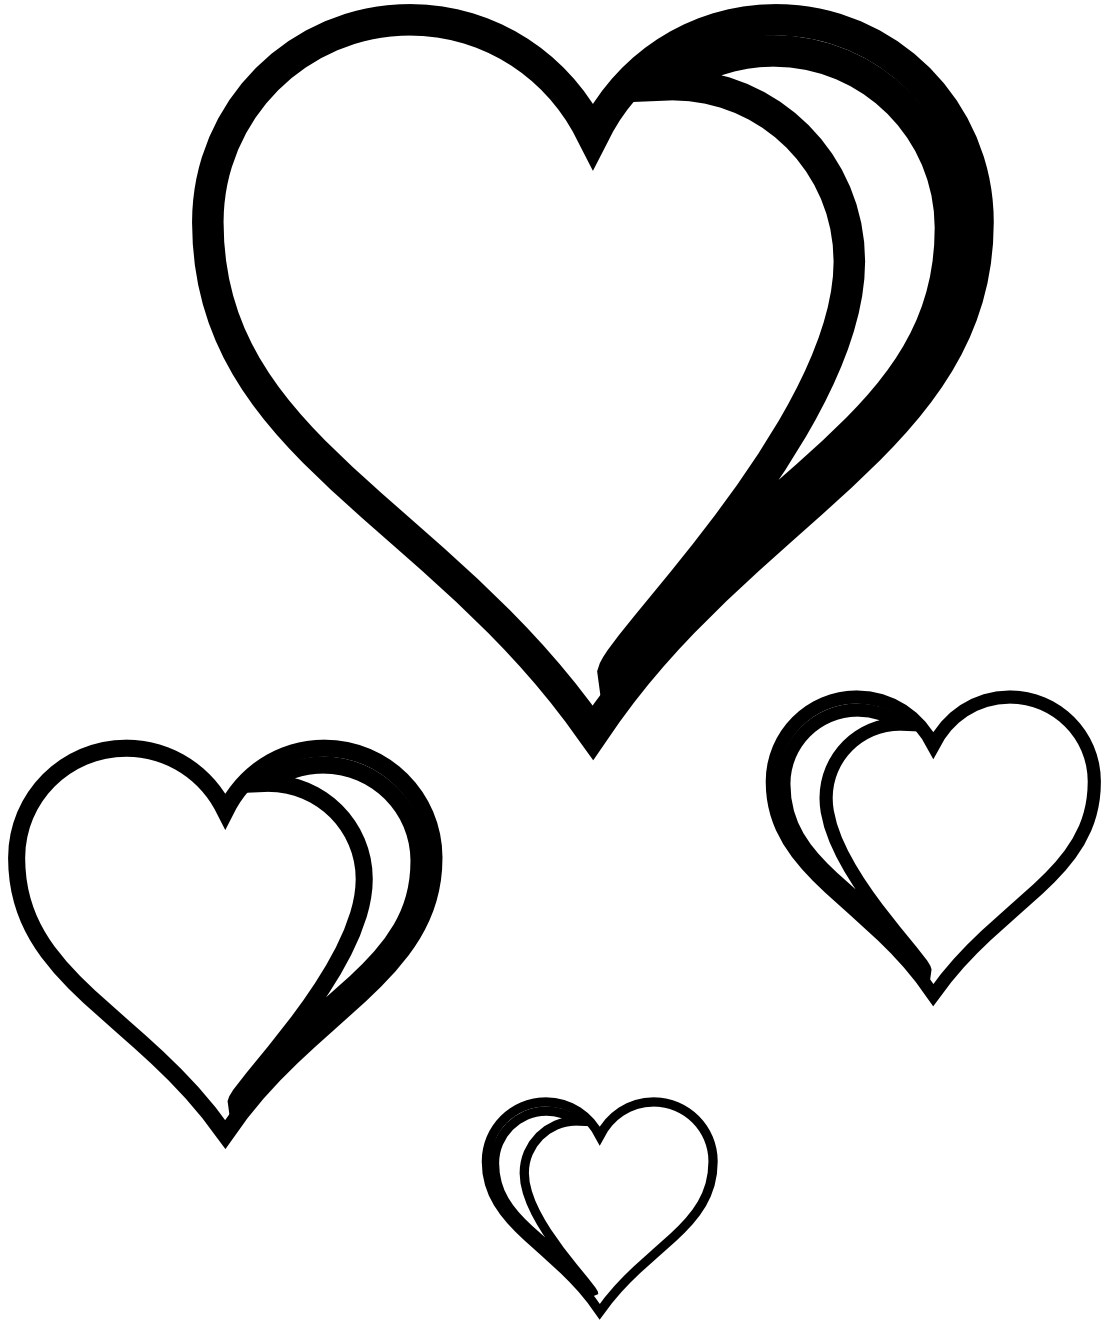 Free clipart silhouette hearts